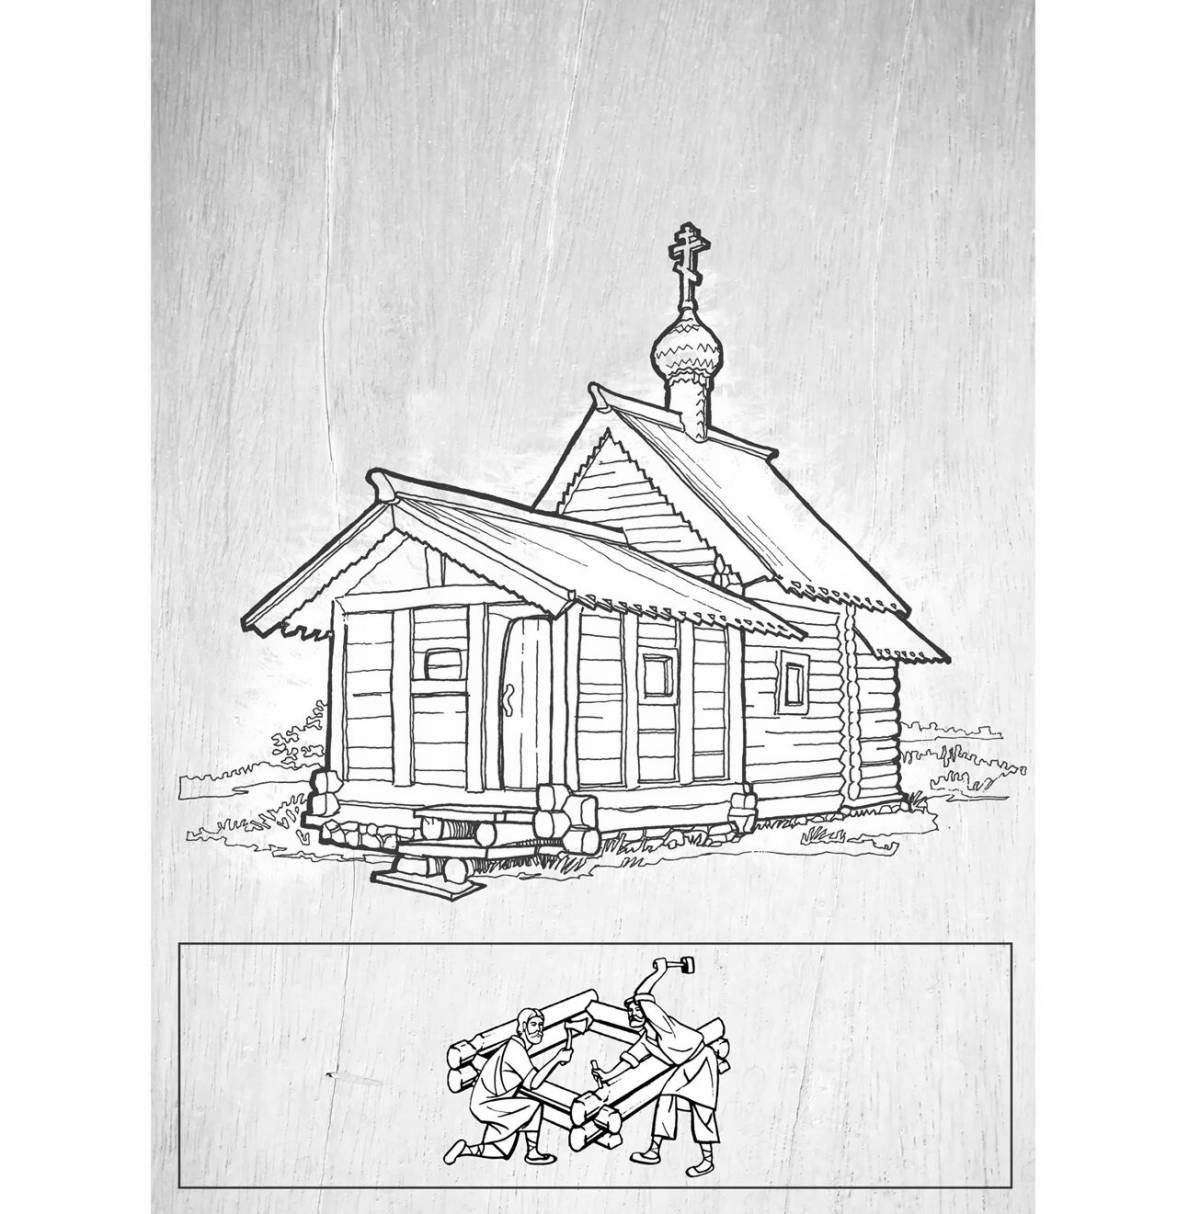 Coloring book shining wooden architecture